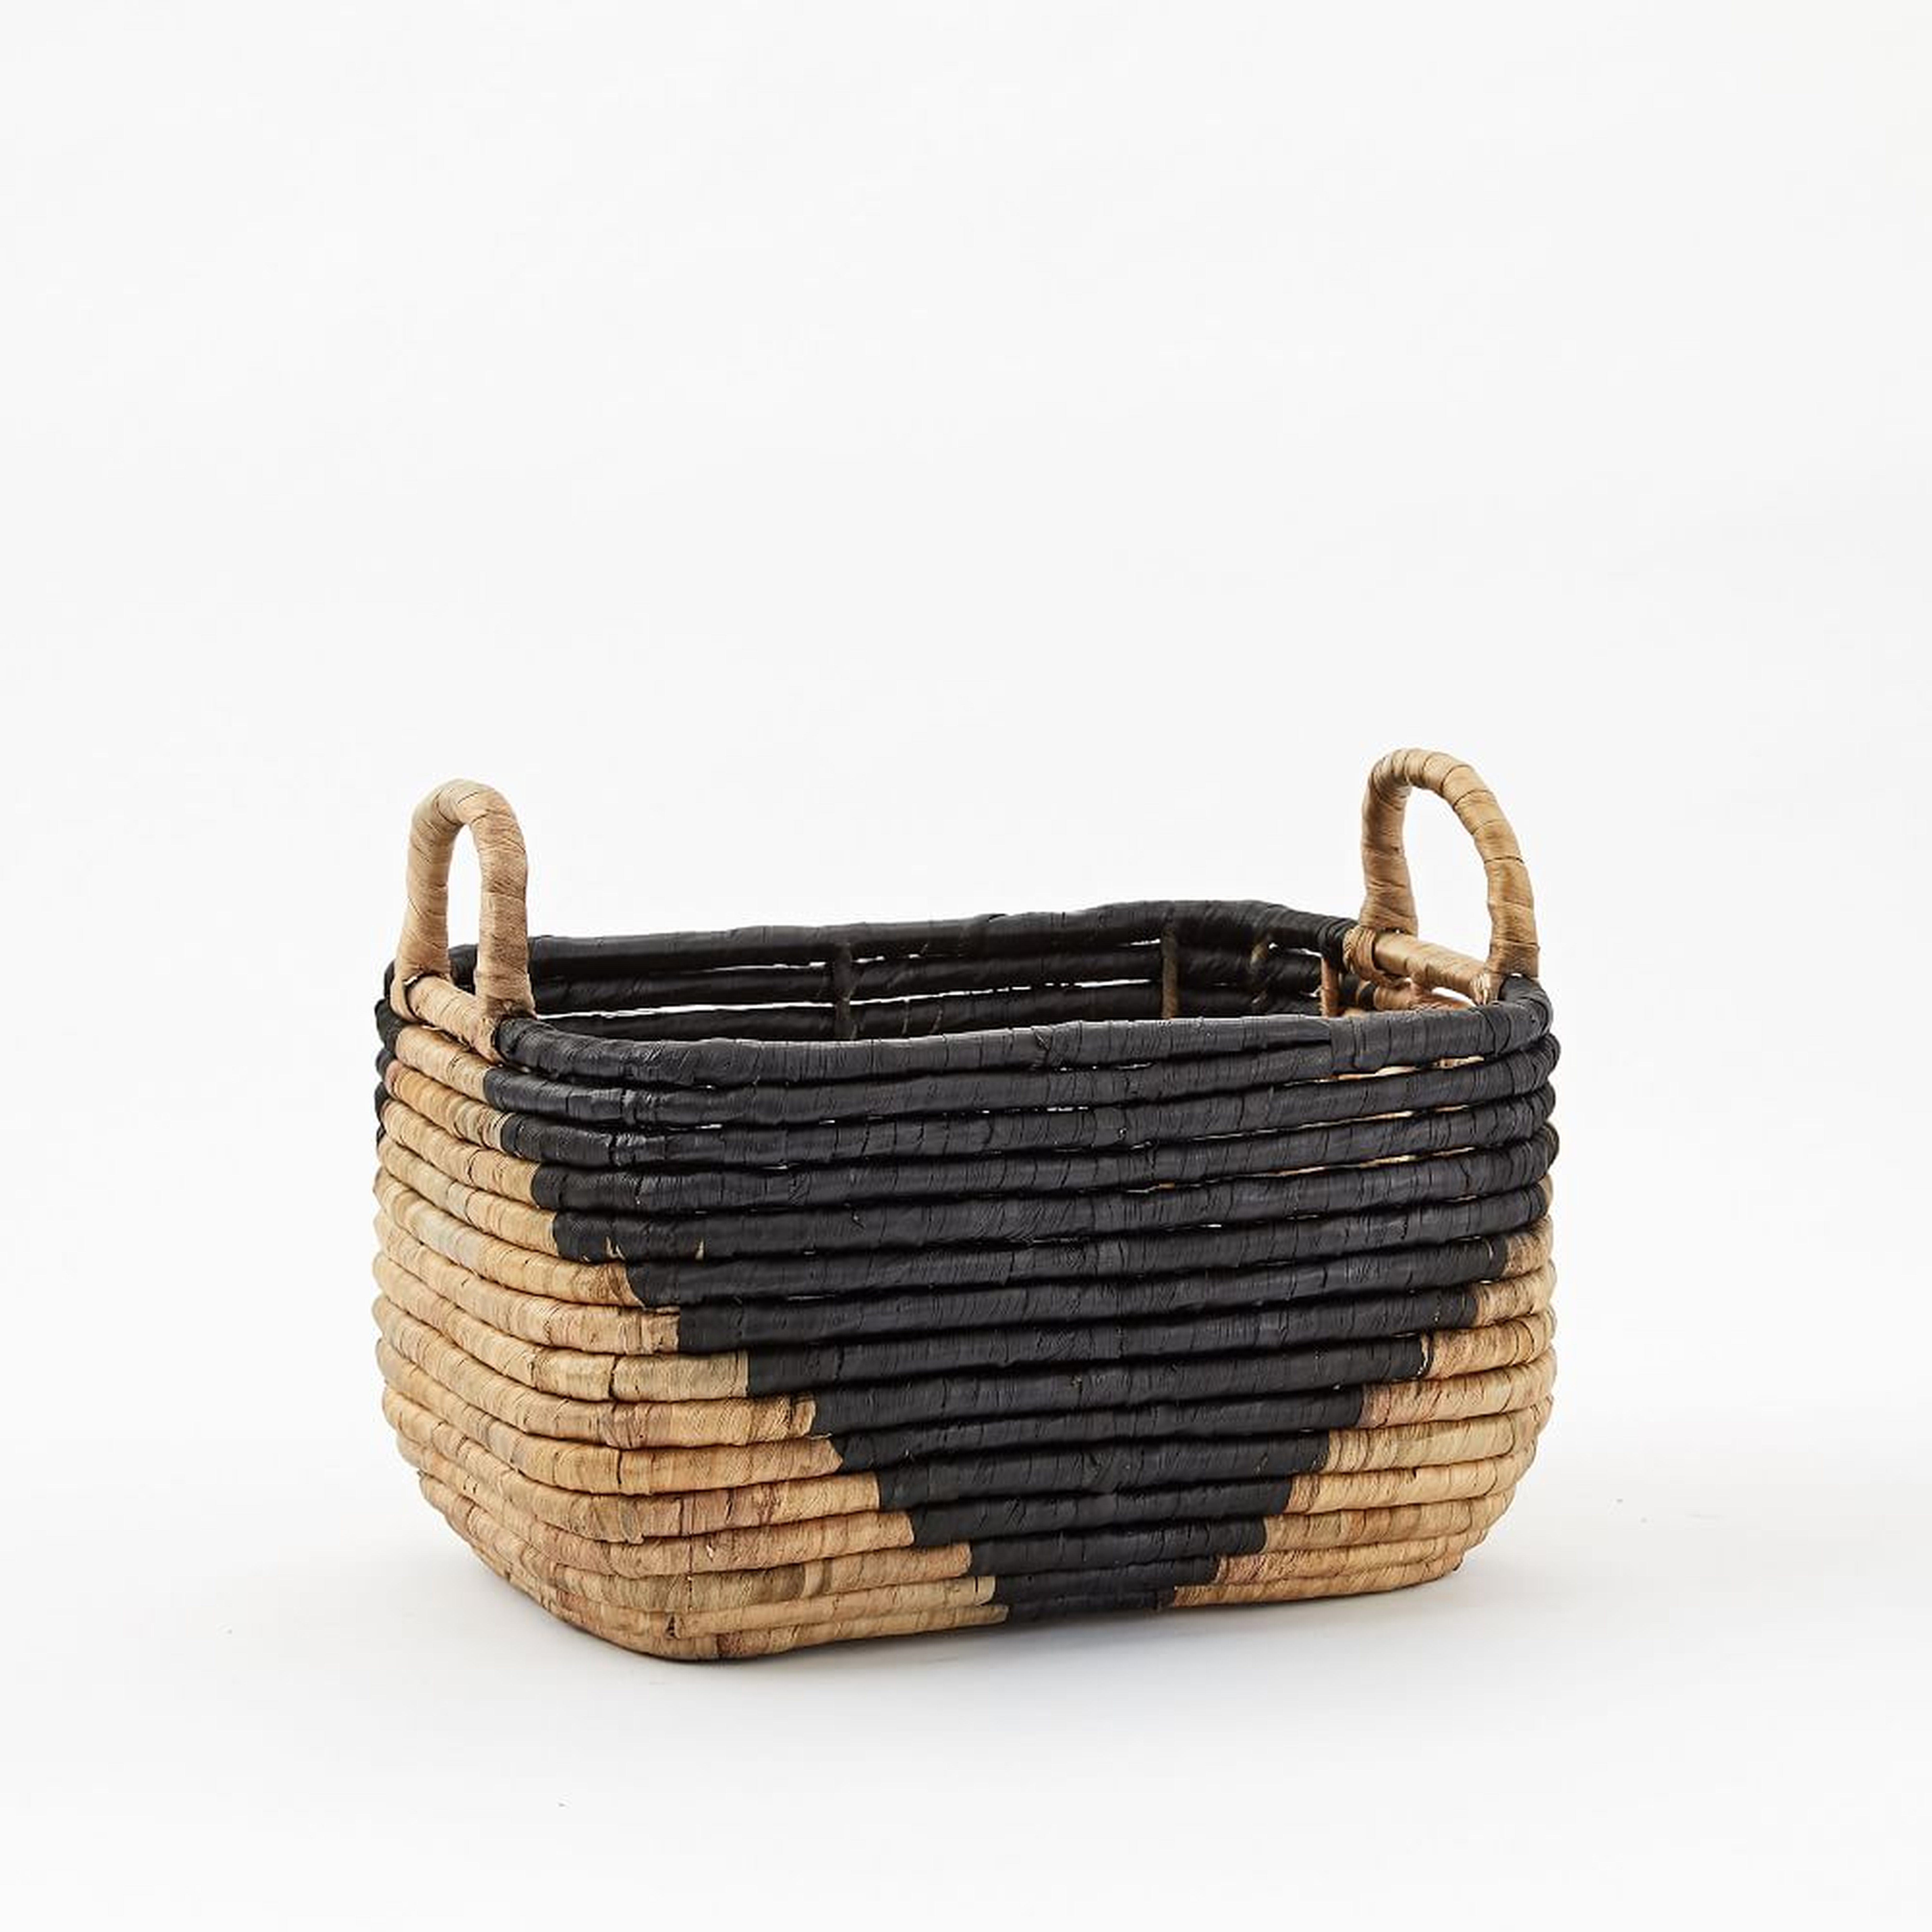 Two-Tone Woven Seagrass, Handle Baskets, Small, 14.5"W x 10.5"D x 8.5"H - West Elm